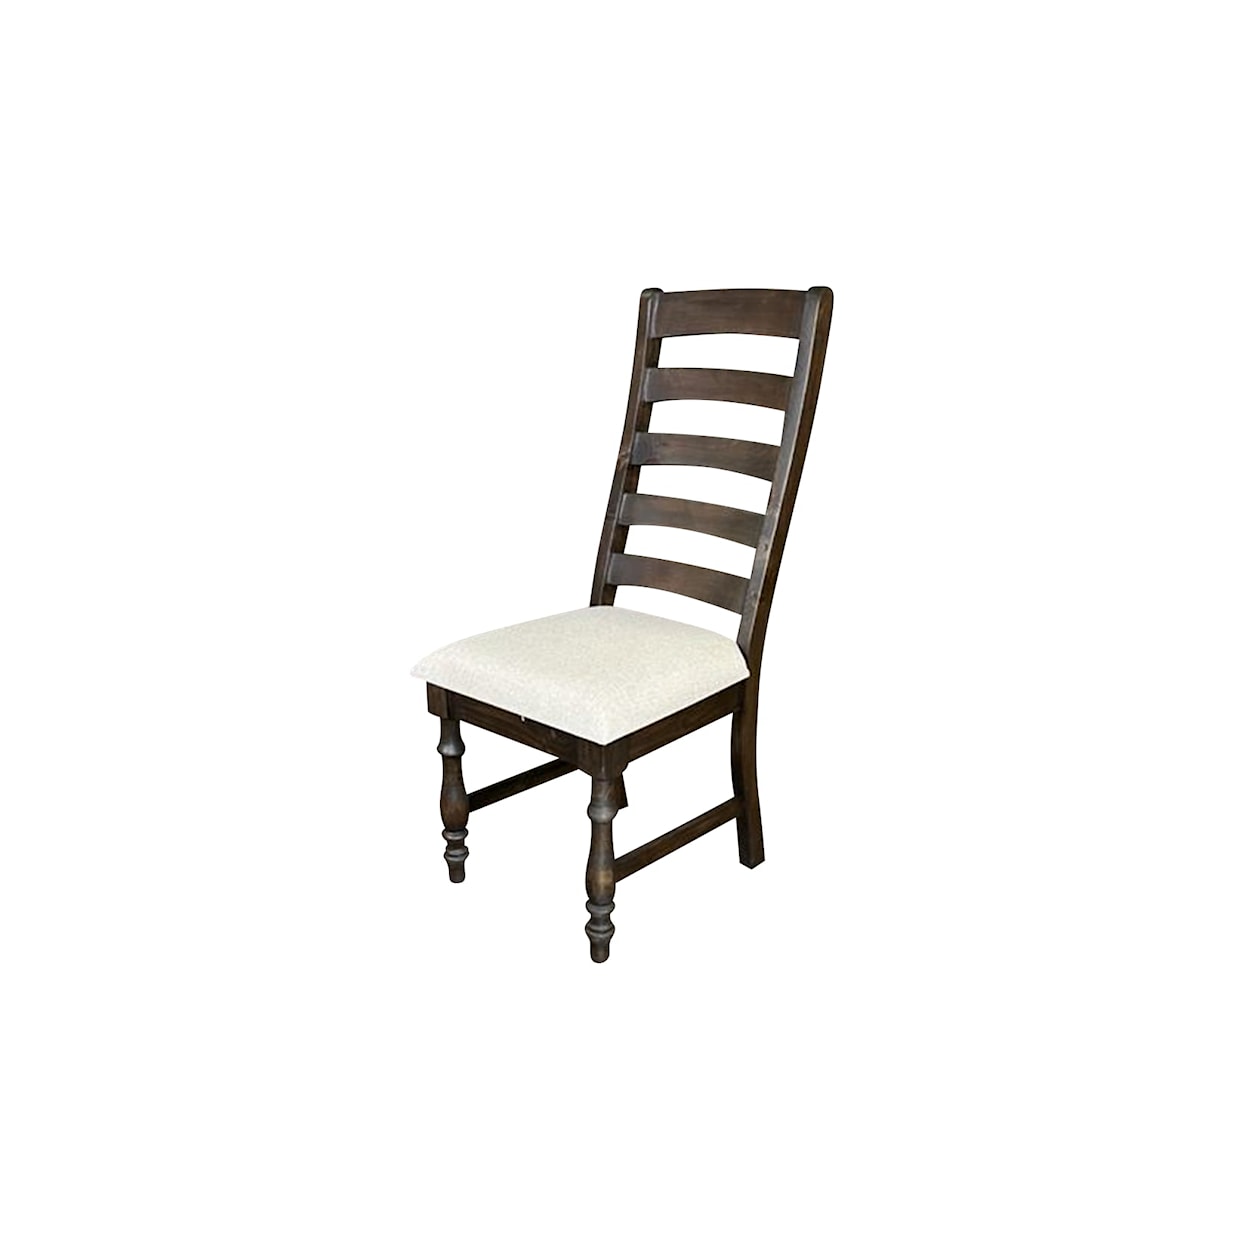 Vintage CARRIE Carrie Dining Chair